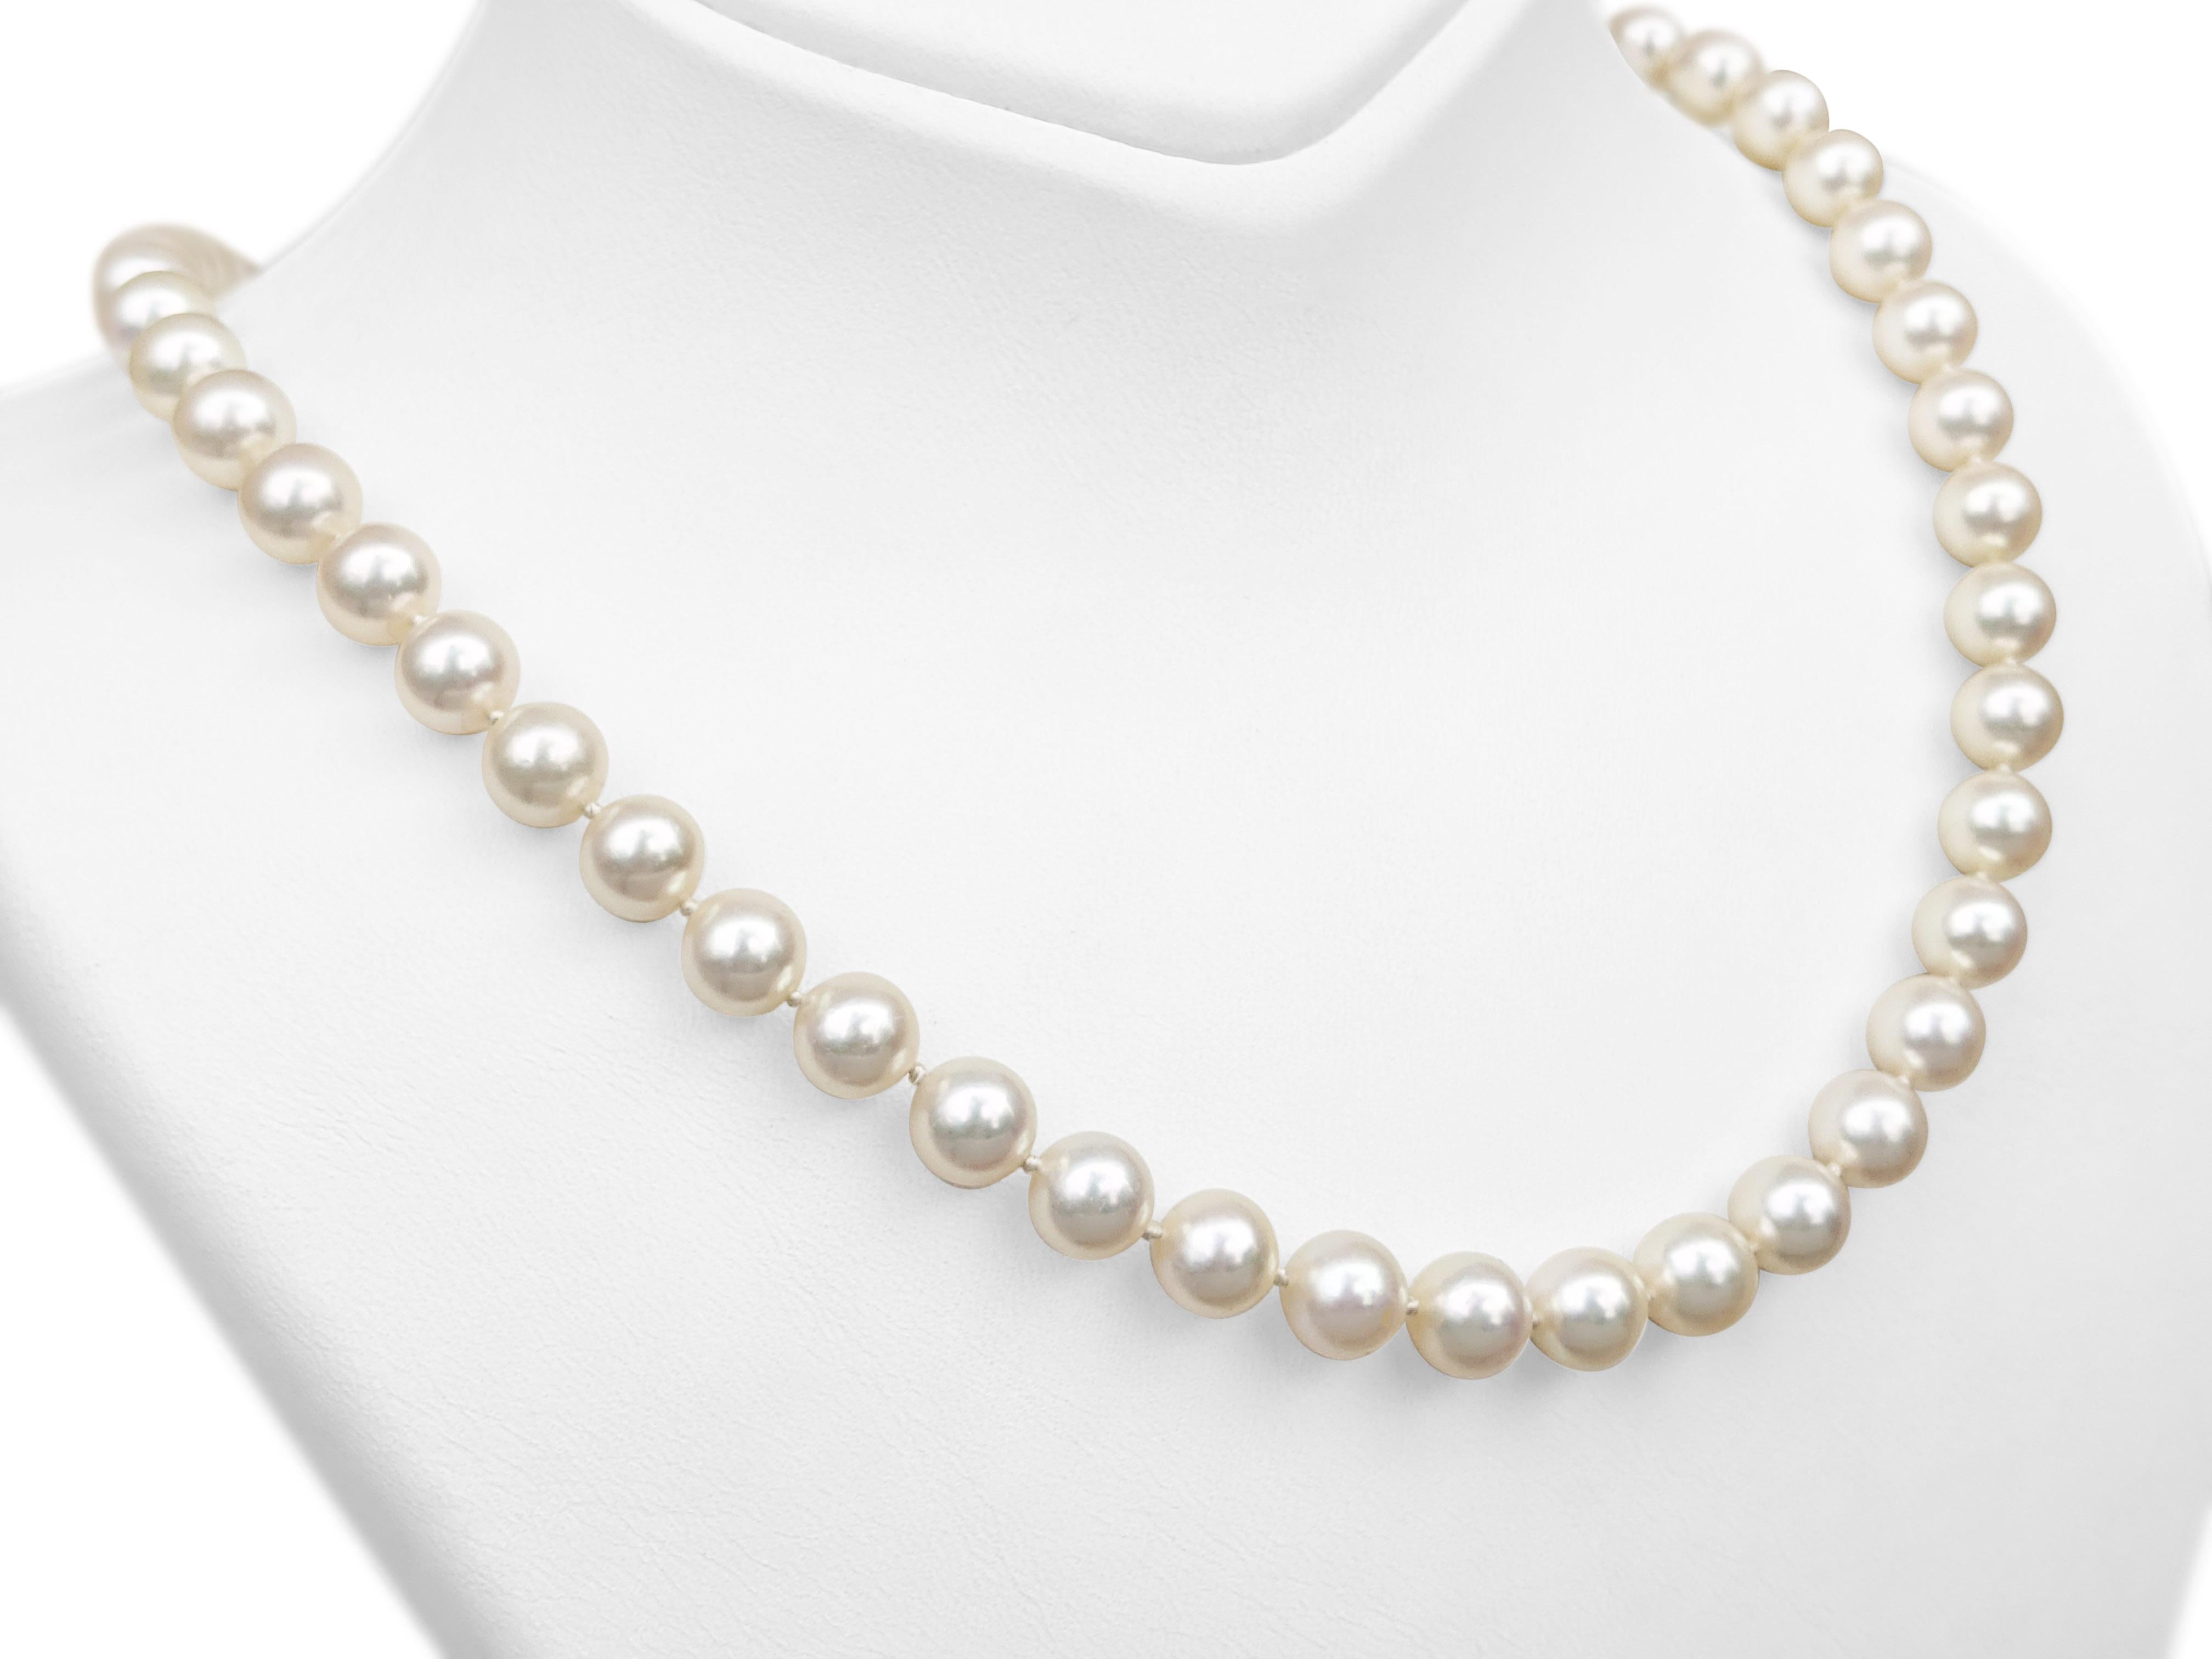 Round Cut $1 NO RESERVE! - 7.5mm Cream Japanese Akoya Pearls, Yellow Gold Necklace